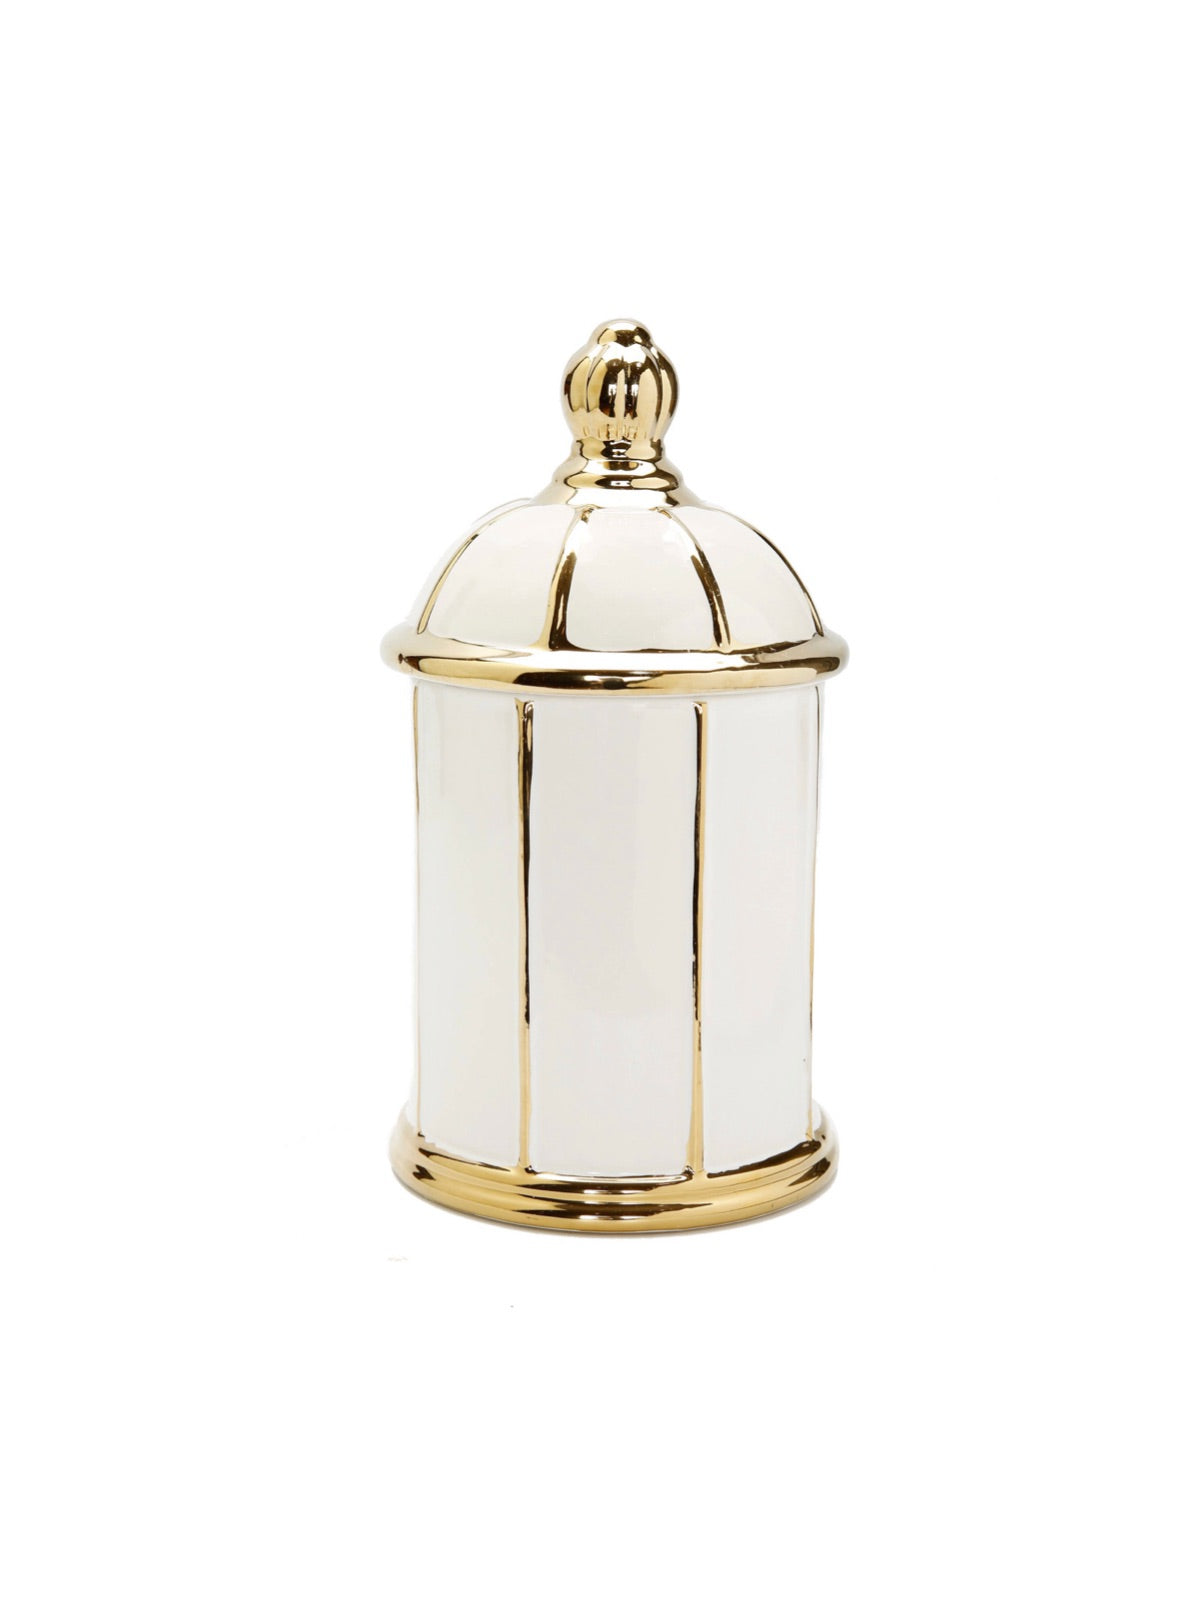 10H white and gold striped ceramic kitchen jars with dome design lid - KYA Home Decor.